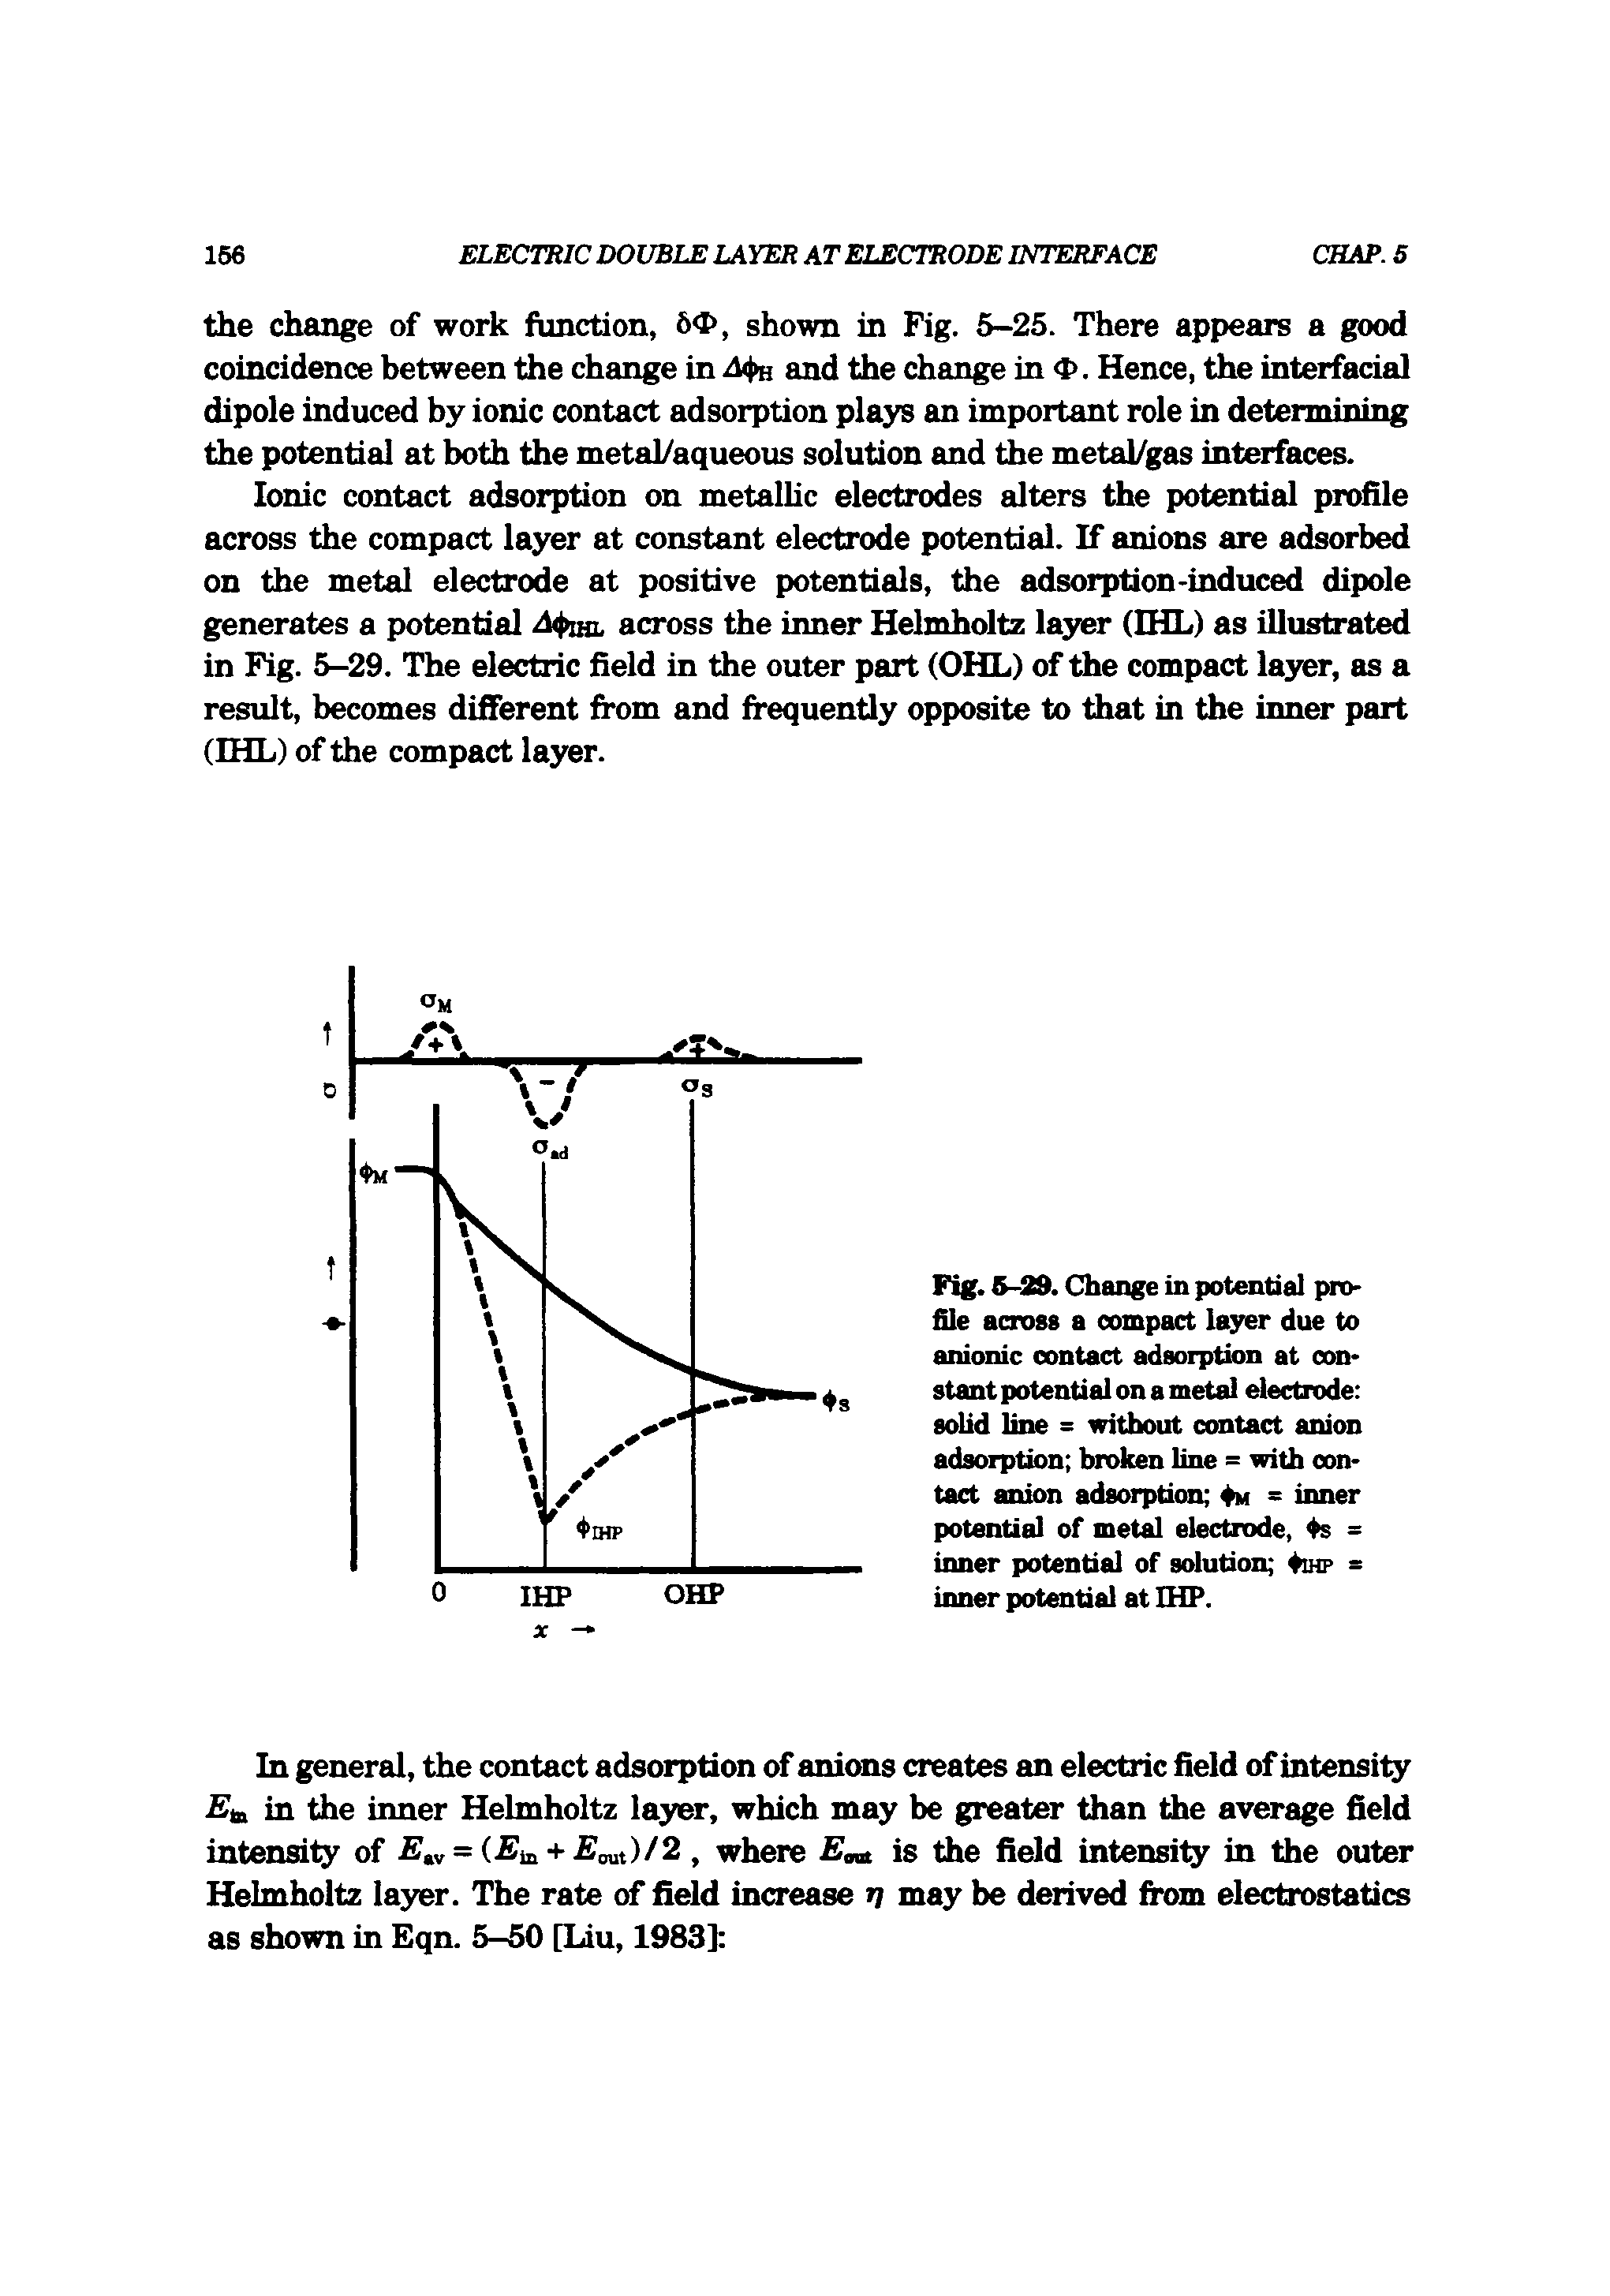 Fig. 6-29. Change in potential profile across a compact layer due to anionic contact adsorption at constant potential on a metal electrode solid line = without contact anion adsorption broken line = with contact anion adsorption 4m - inner potential of metal electrode, 4s = inner potential of solution 4ihp = inner potential at IHP.